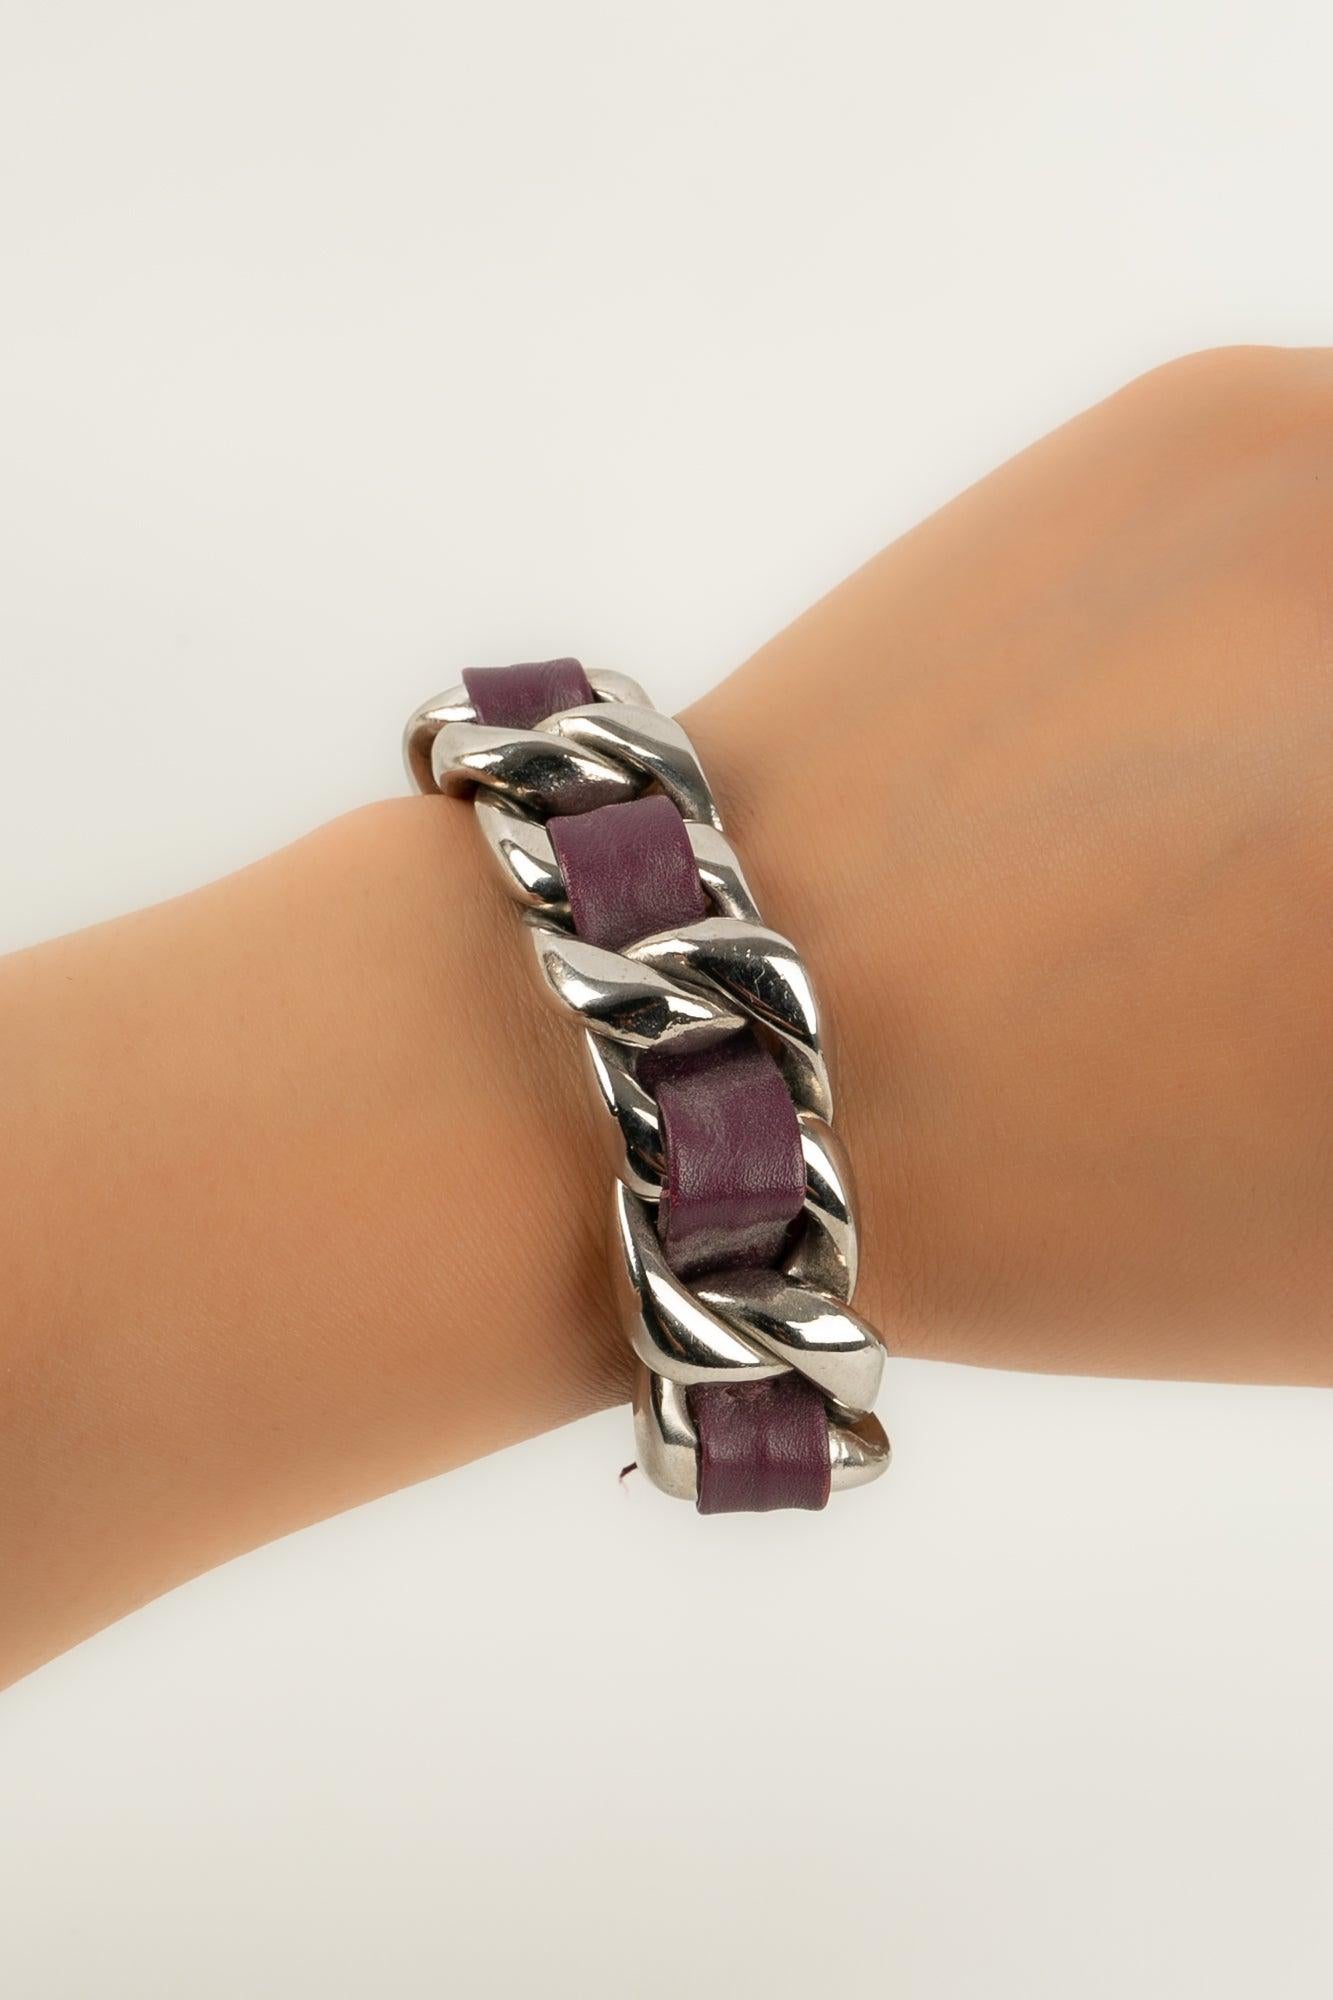 Chanel - (Made in Italy) Bracelet in silvery metal and purple leather. Spring/Summer 2002 Collection.

Additional information:
Condition: Very good condition
Dimensions: Length: from 18 cm to 19.5 cm
Period: 21st Century

Seller Reference: BRAB86